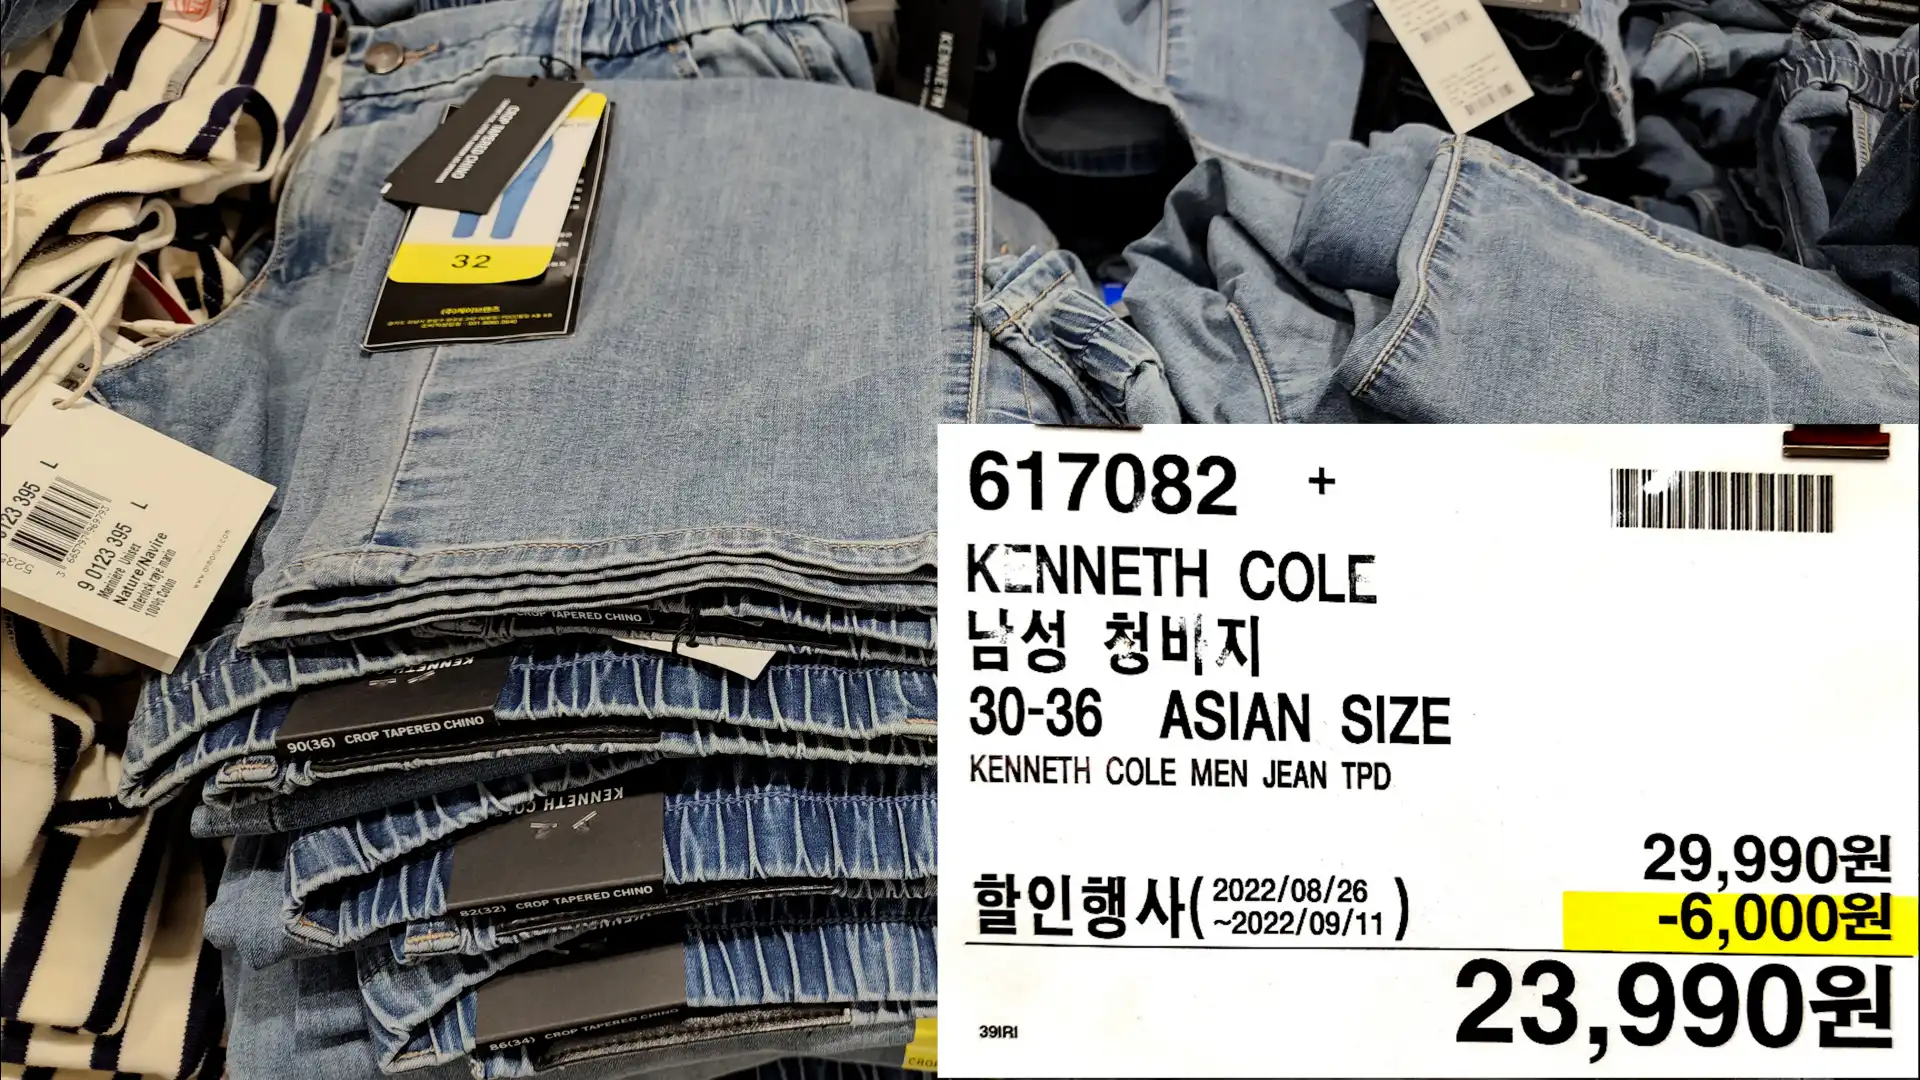 KENNETH COLE
남성 청바지
30-36 ASIAN SIZE
KENNETH COLE MEN JEAN TPD
23,990원